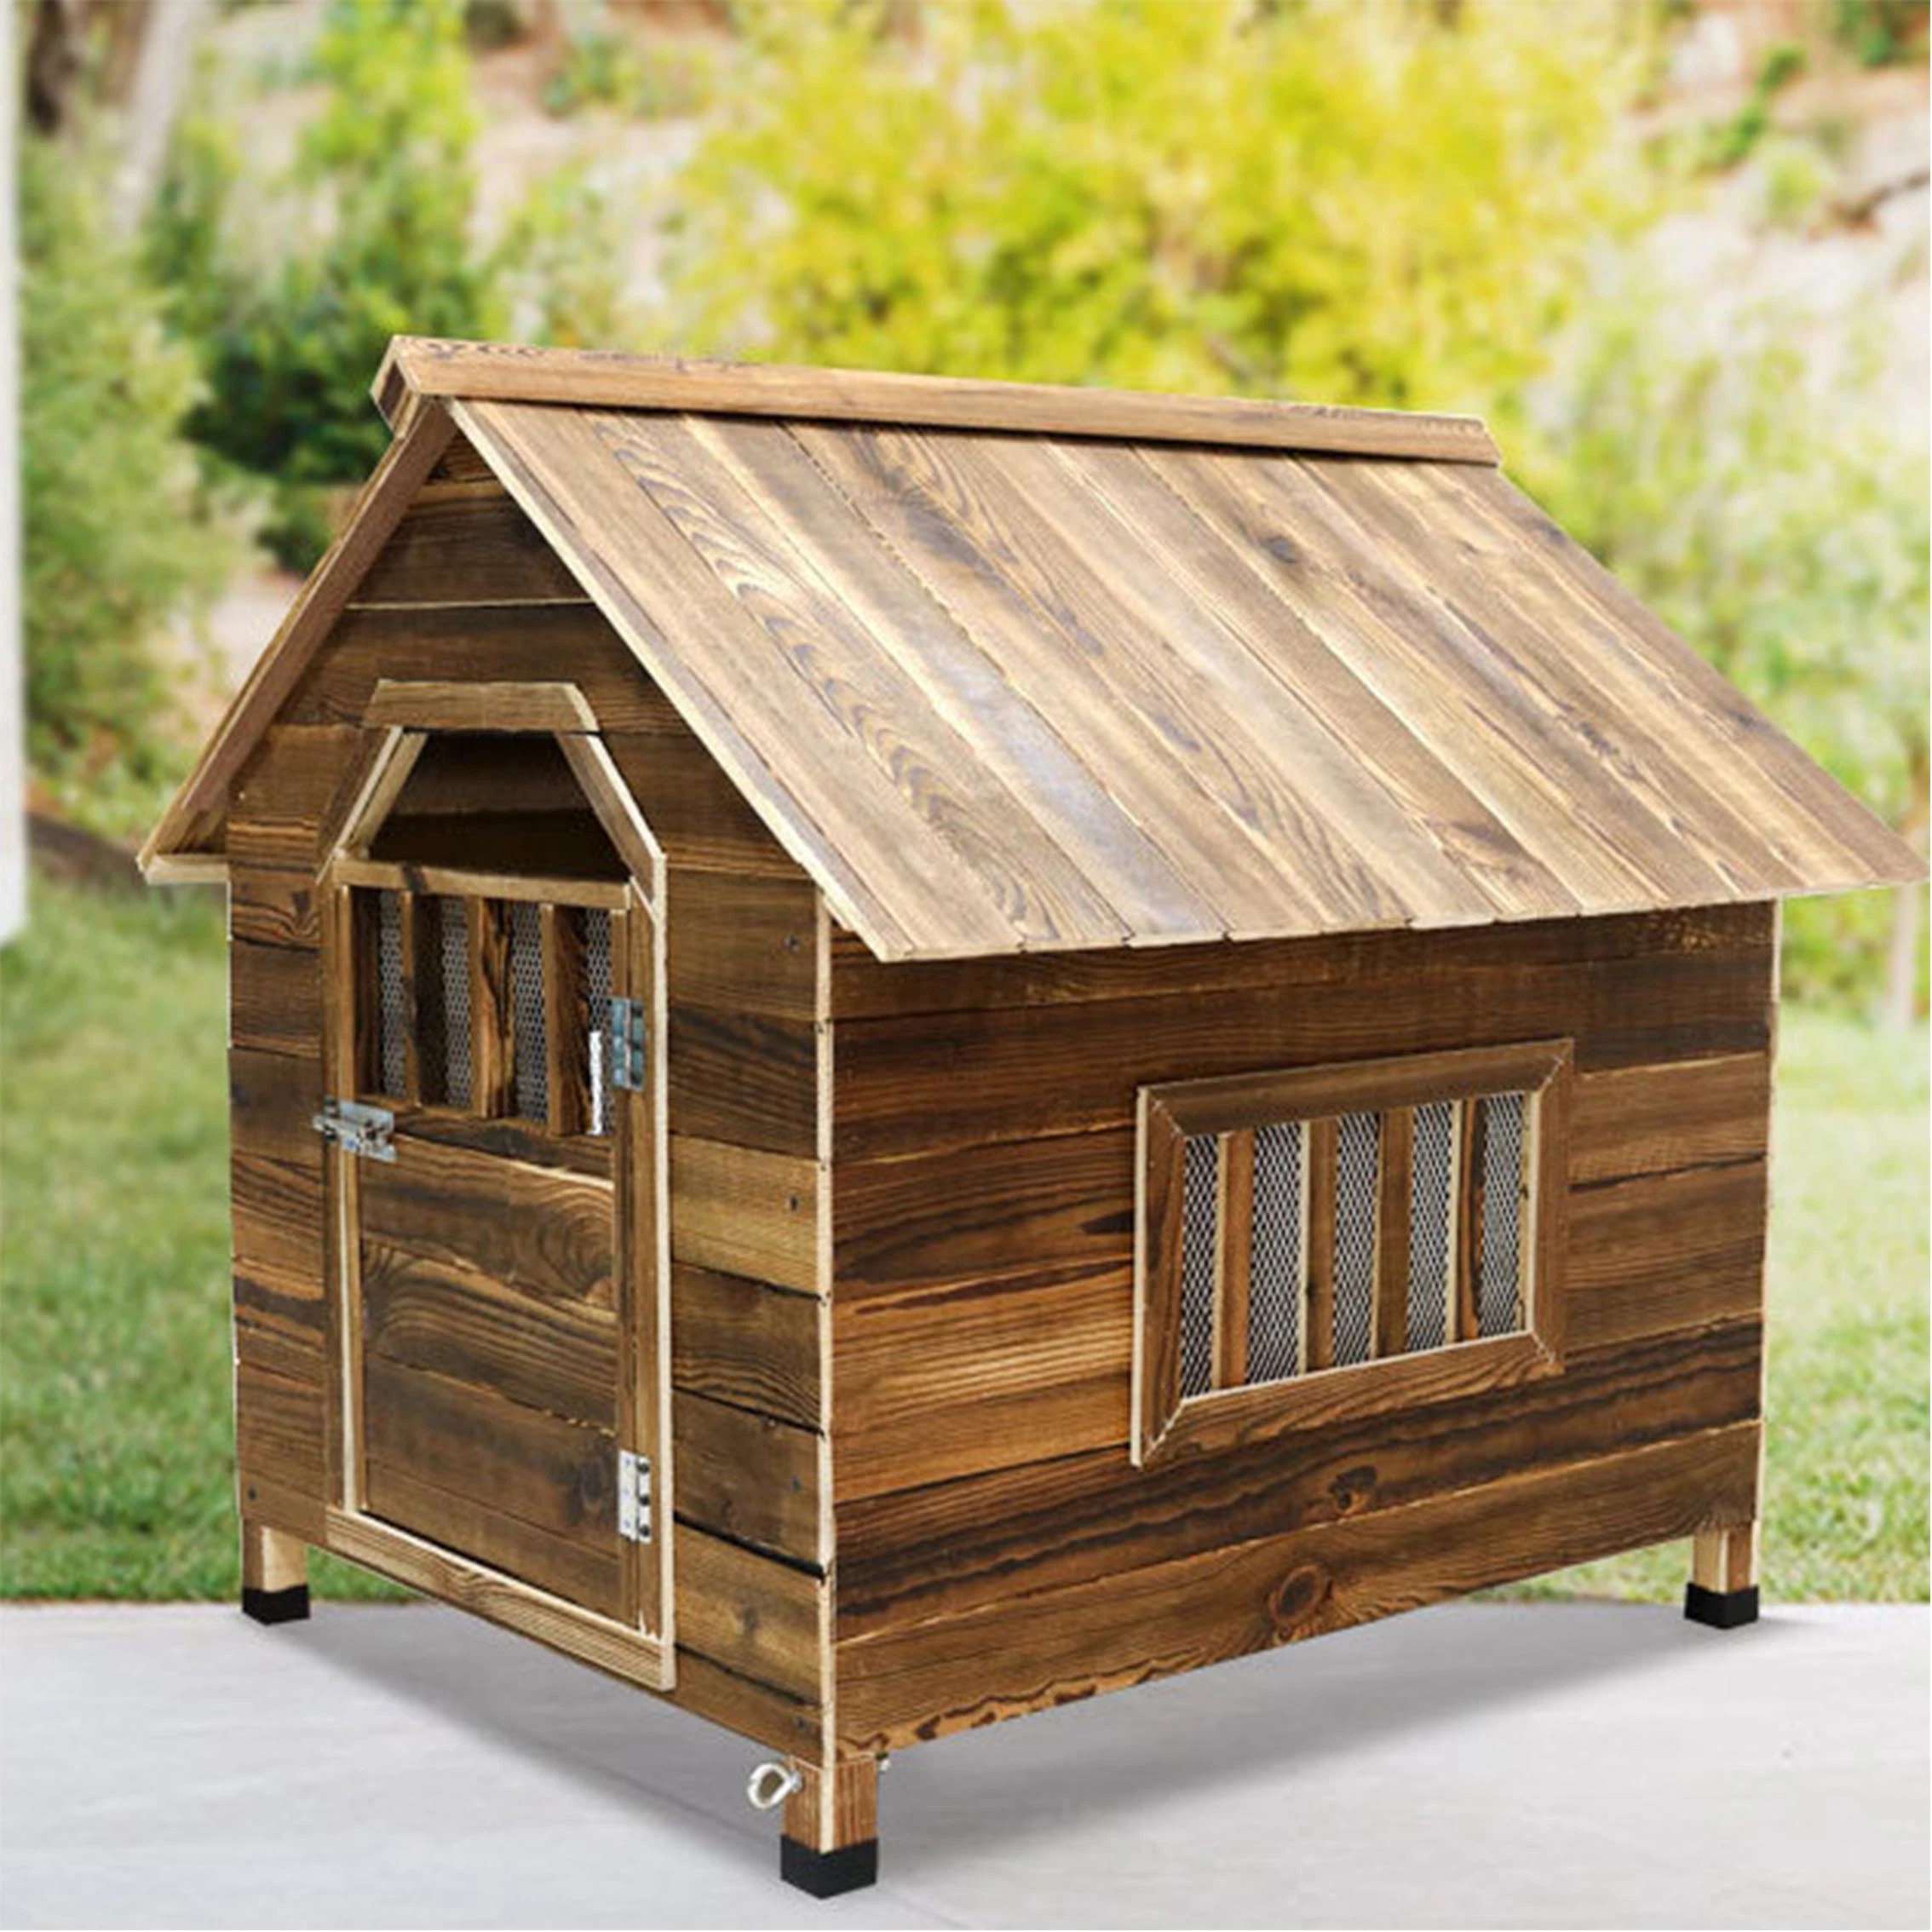 Solid Wood Warm Outdoor Indoor Carbonized Anticorrosive Rainproof Solid Wood Dog Cage Kennel Dog House Pet Villa Furniture Amaw-0127